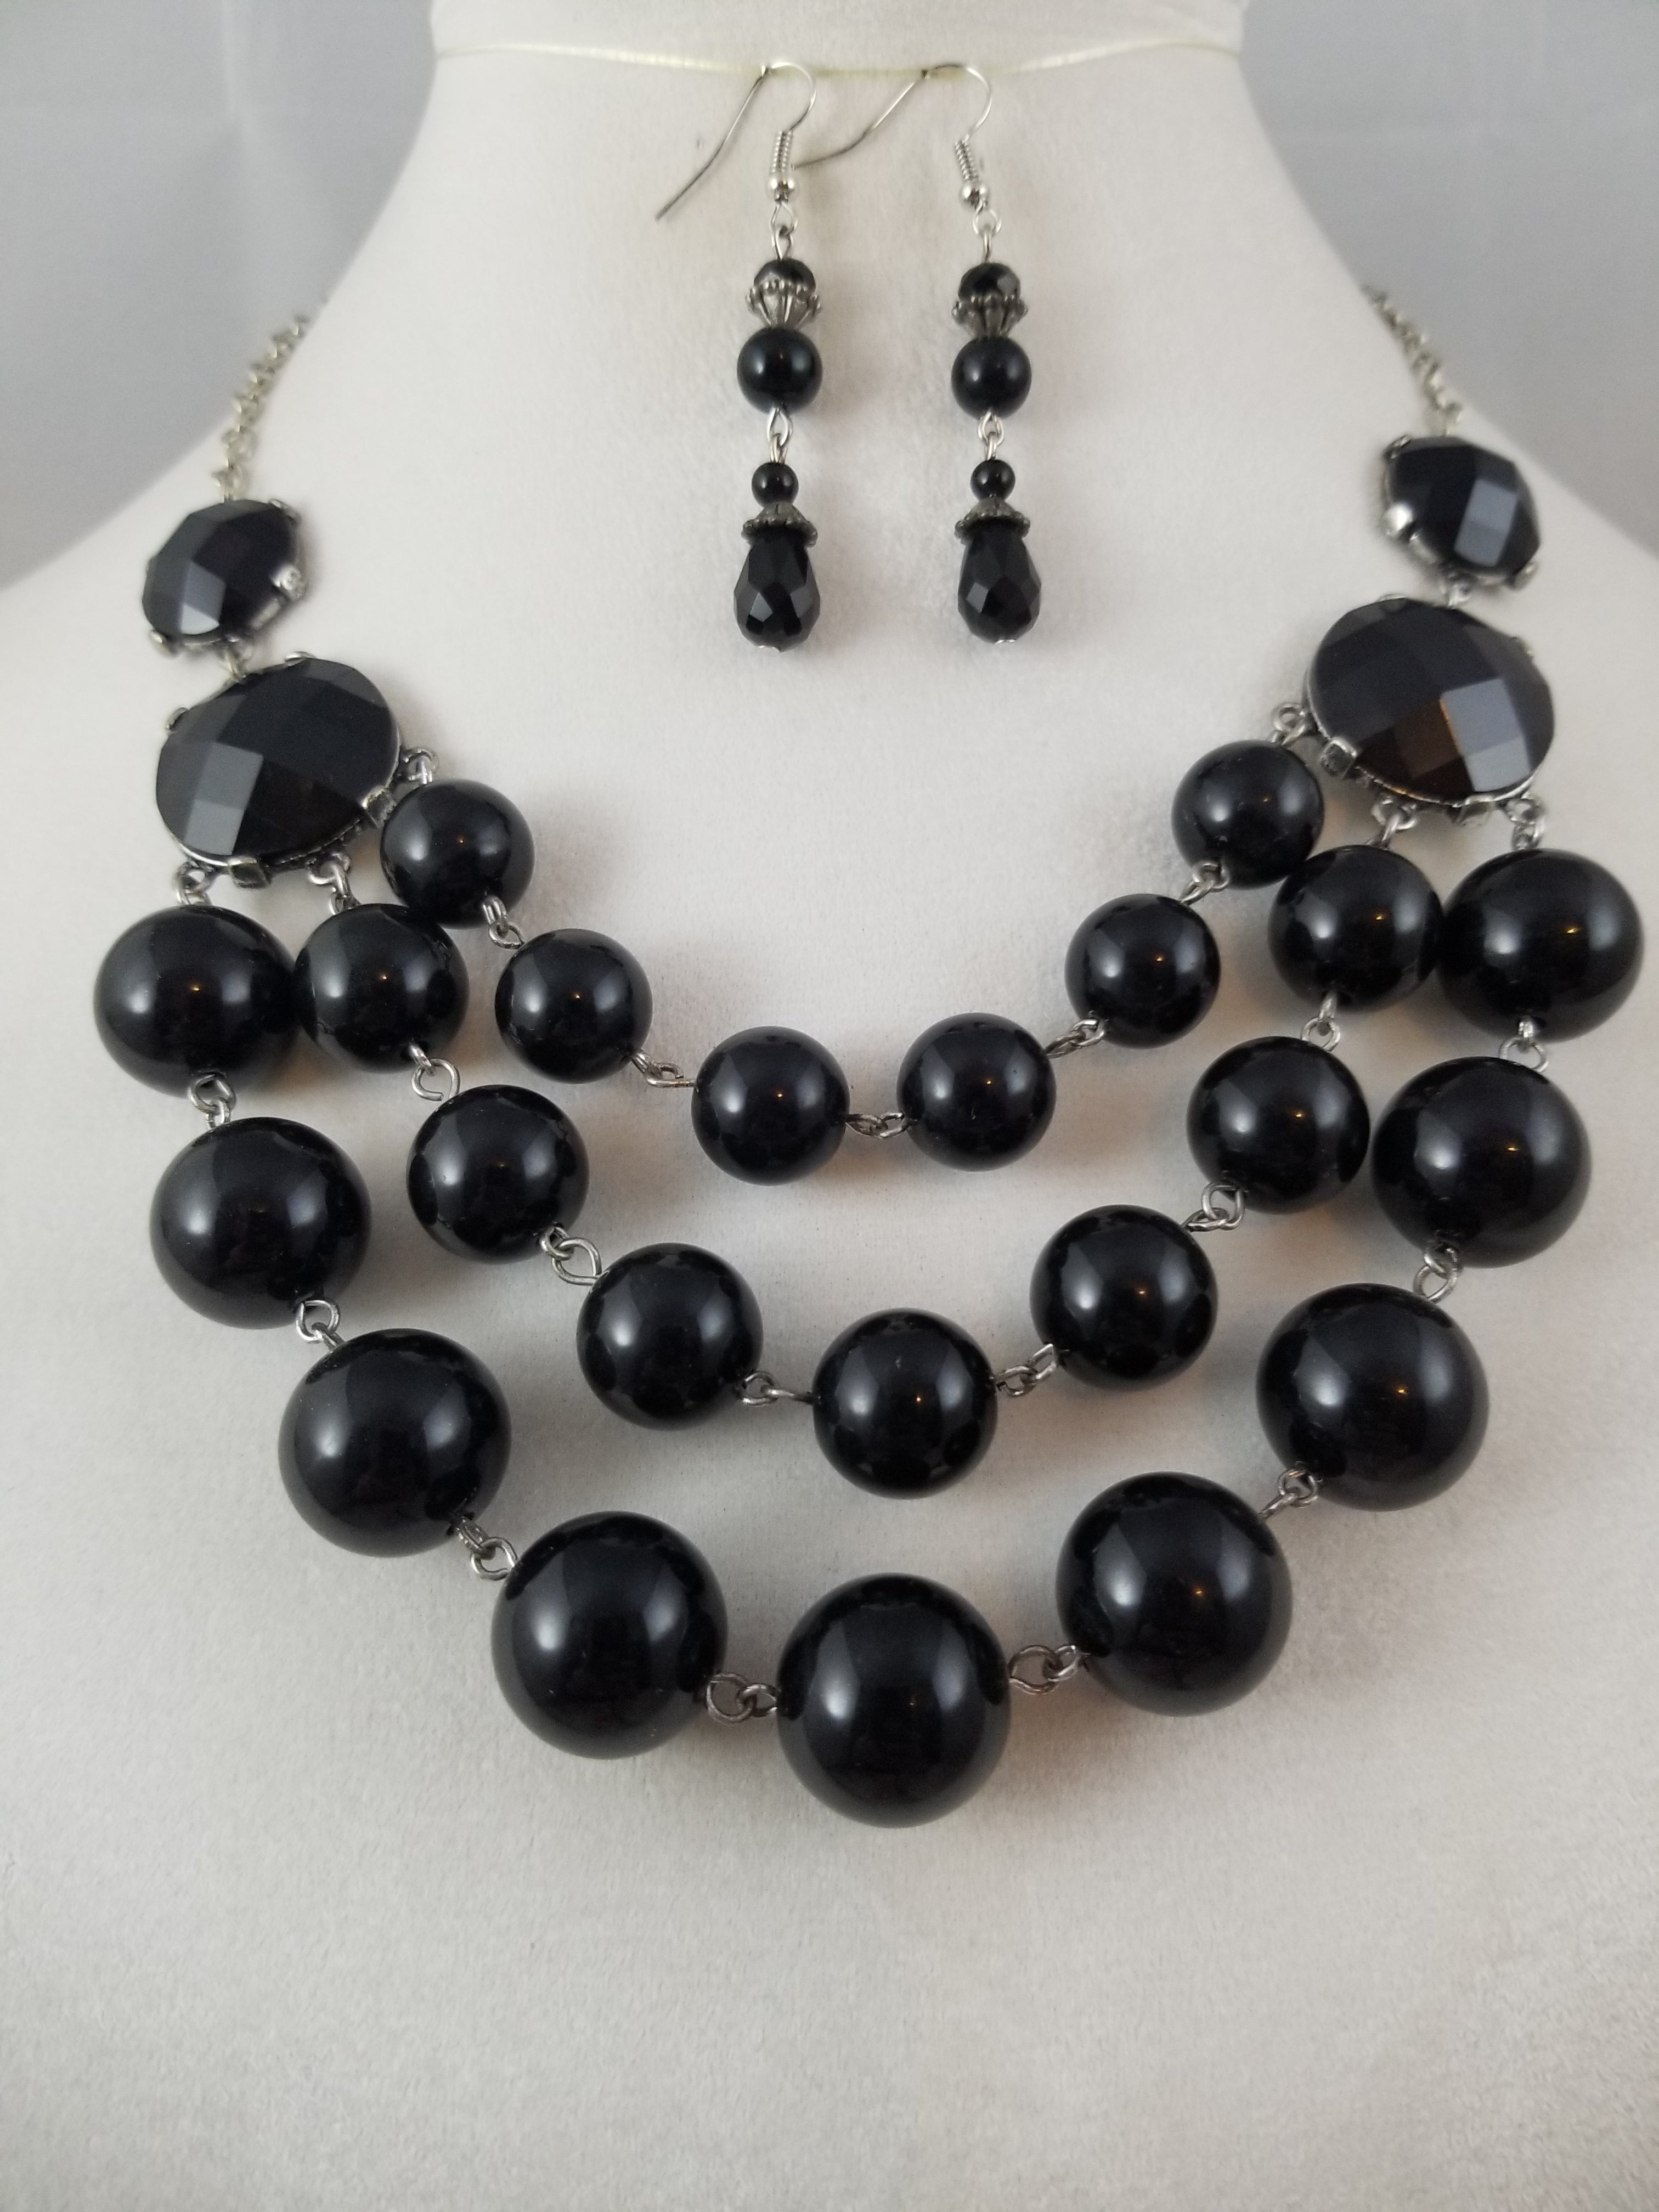 Black Bubbles Necklace with Earrings